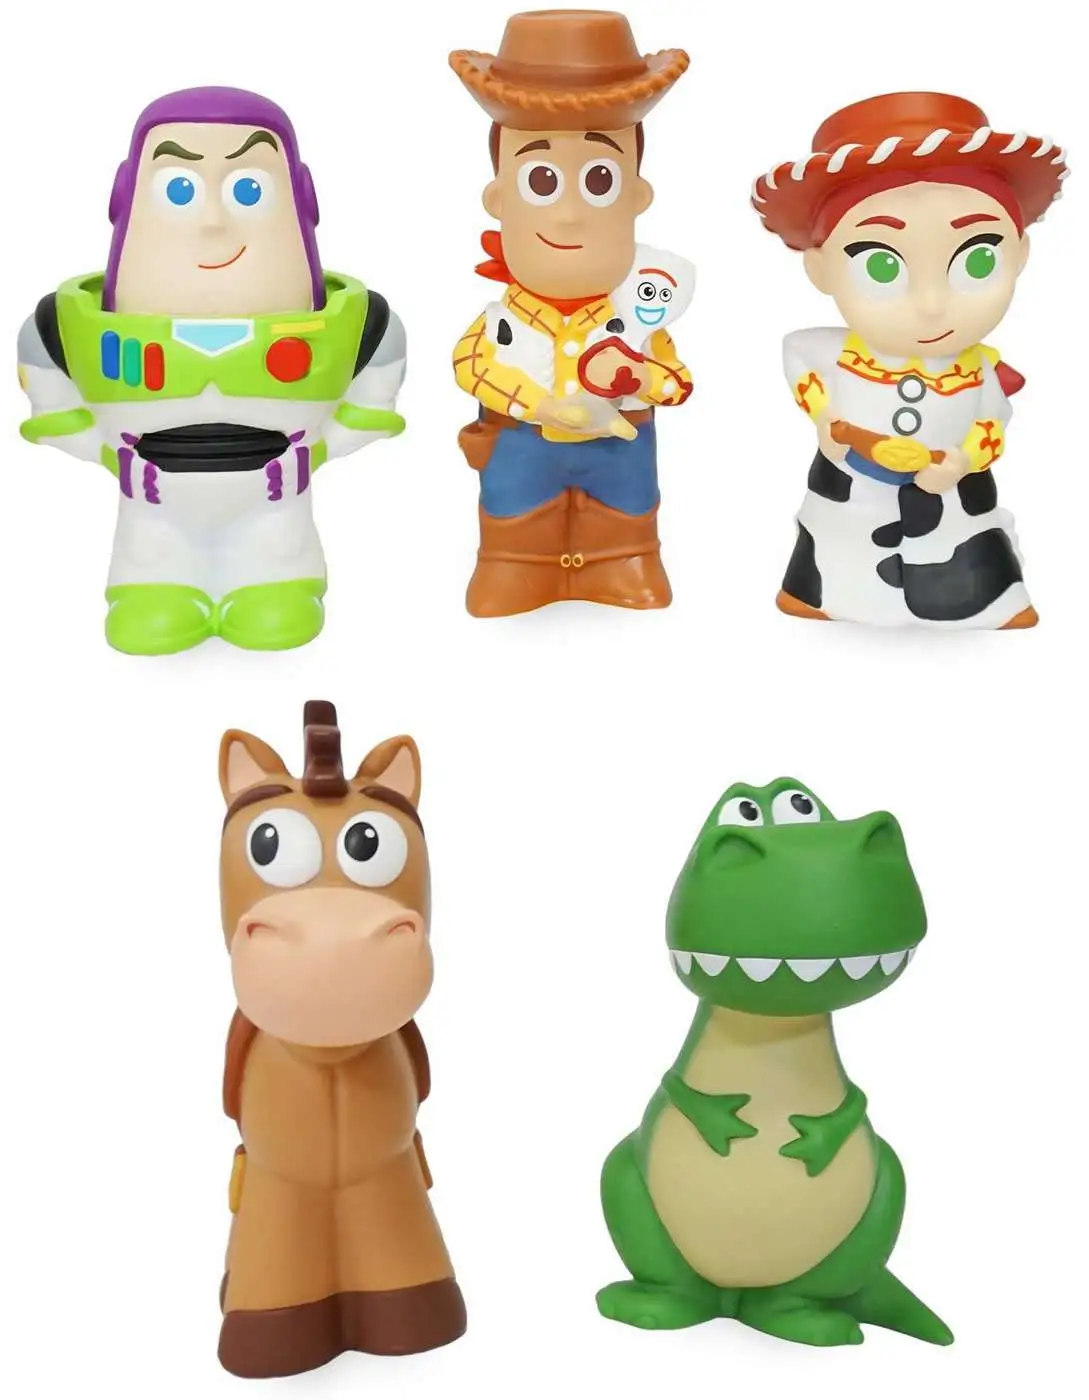 Disney Toy Story 4 Toy Story 4 Exclusive Lunch Box - ToyWiz